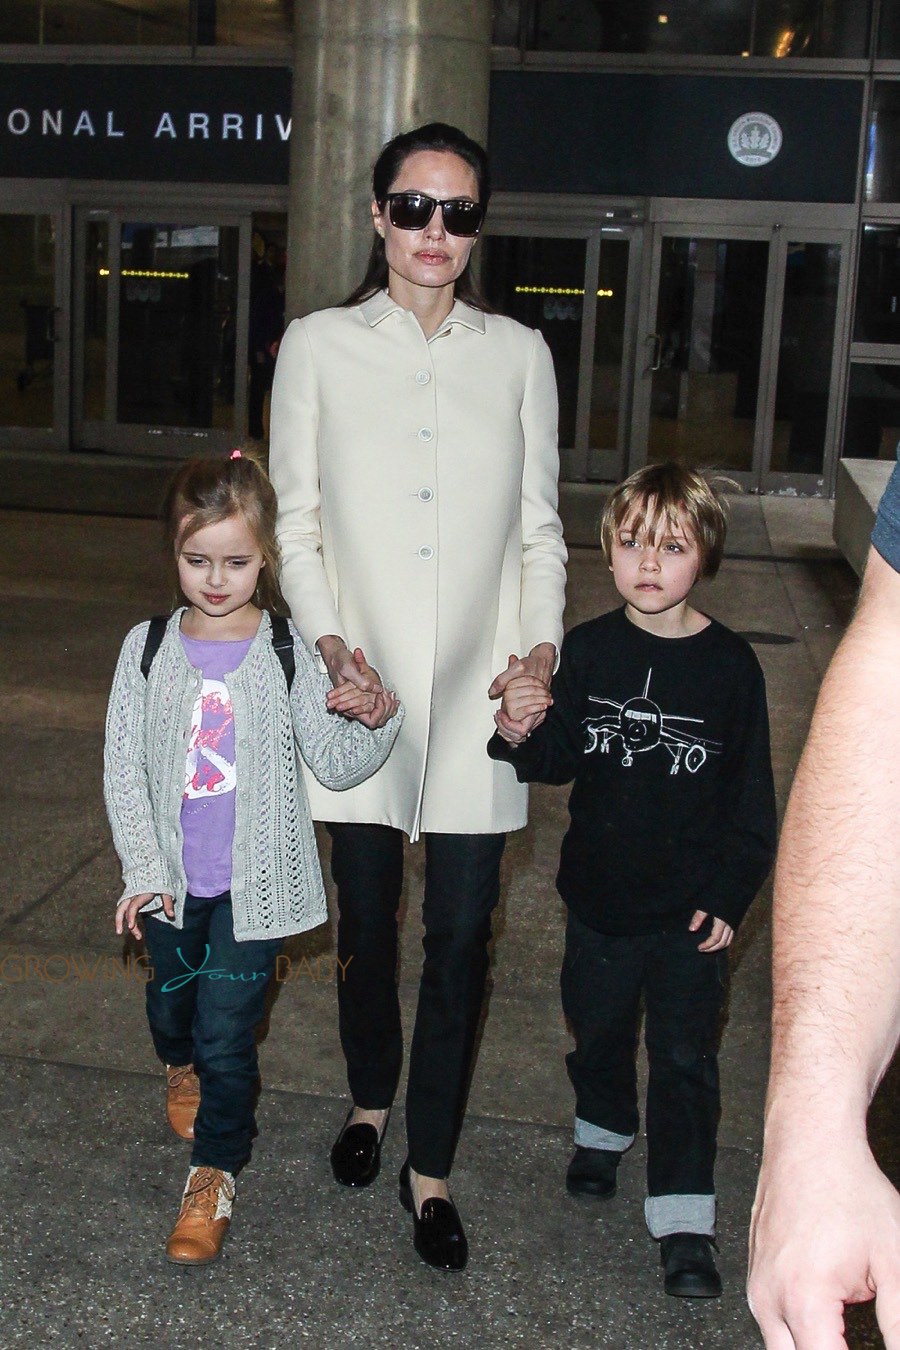 Angelina Jolie at LAX with twins Vivienne and Knox - Growing Your Baby